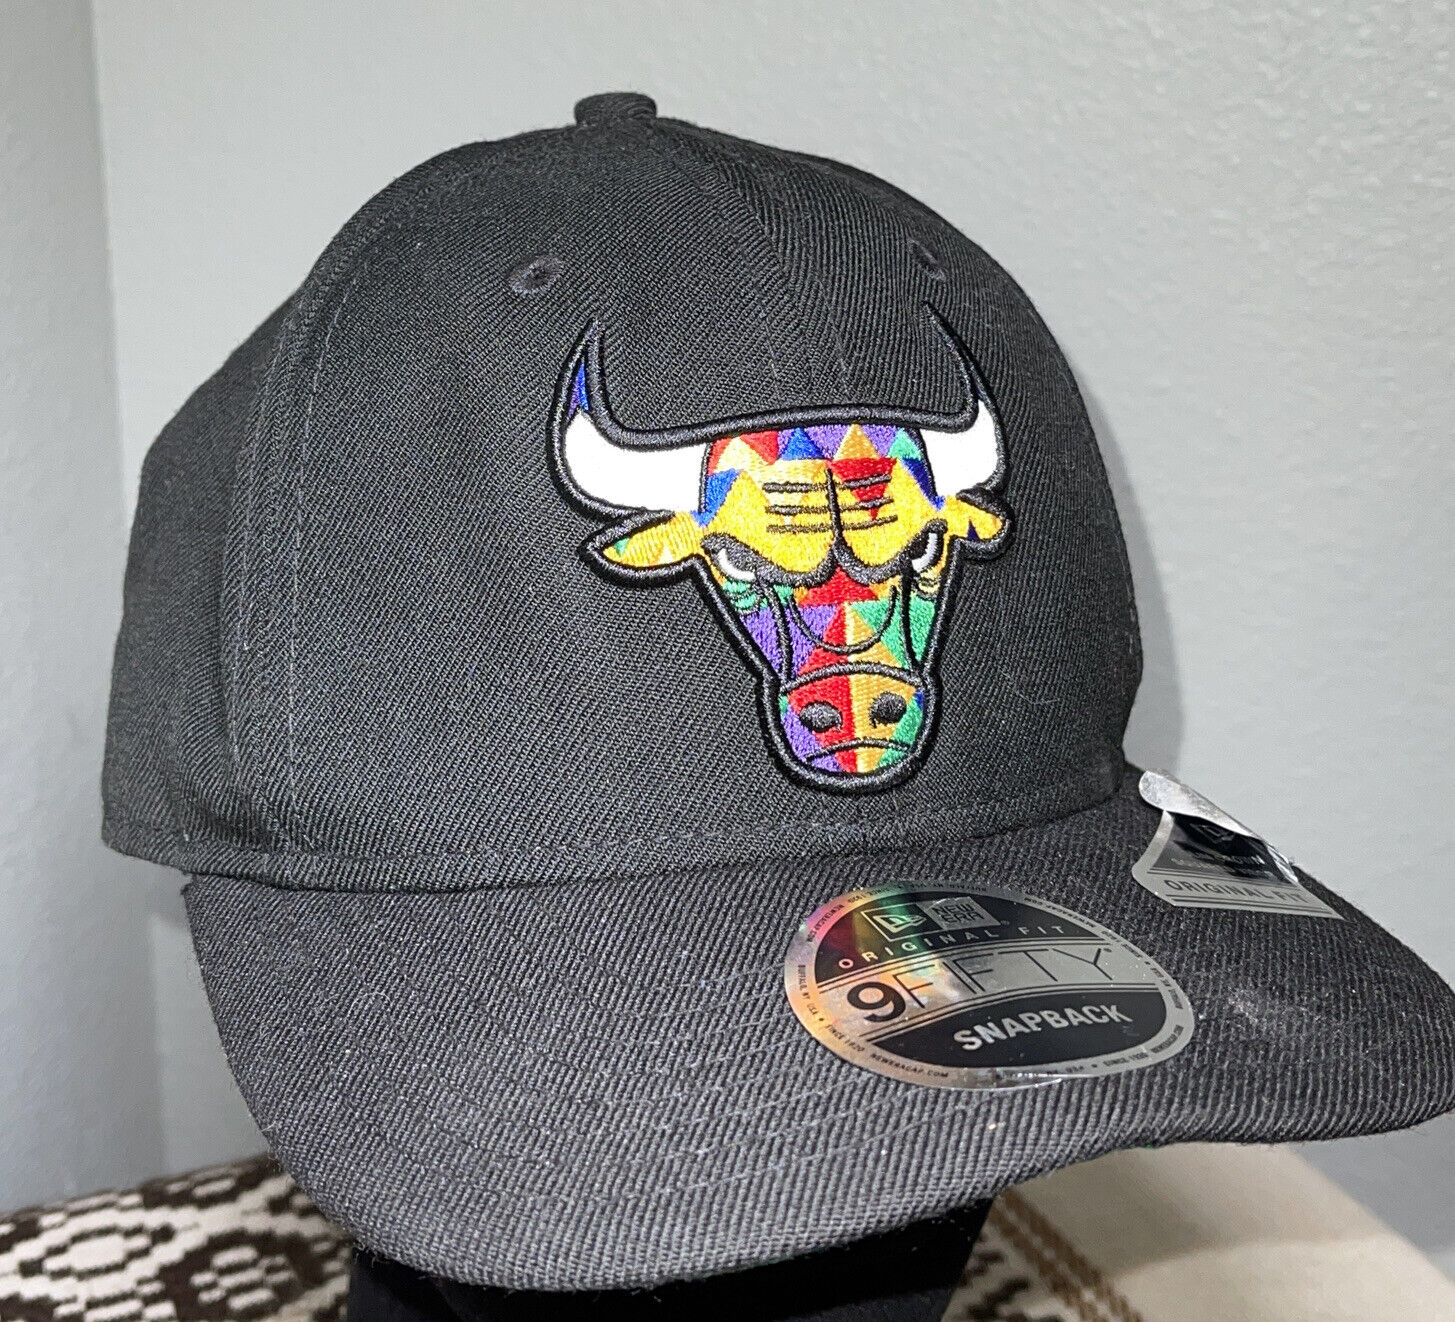 New Era snapback 9fifty Chicago Bulls multicolor With Tags Rare 